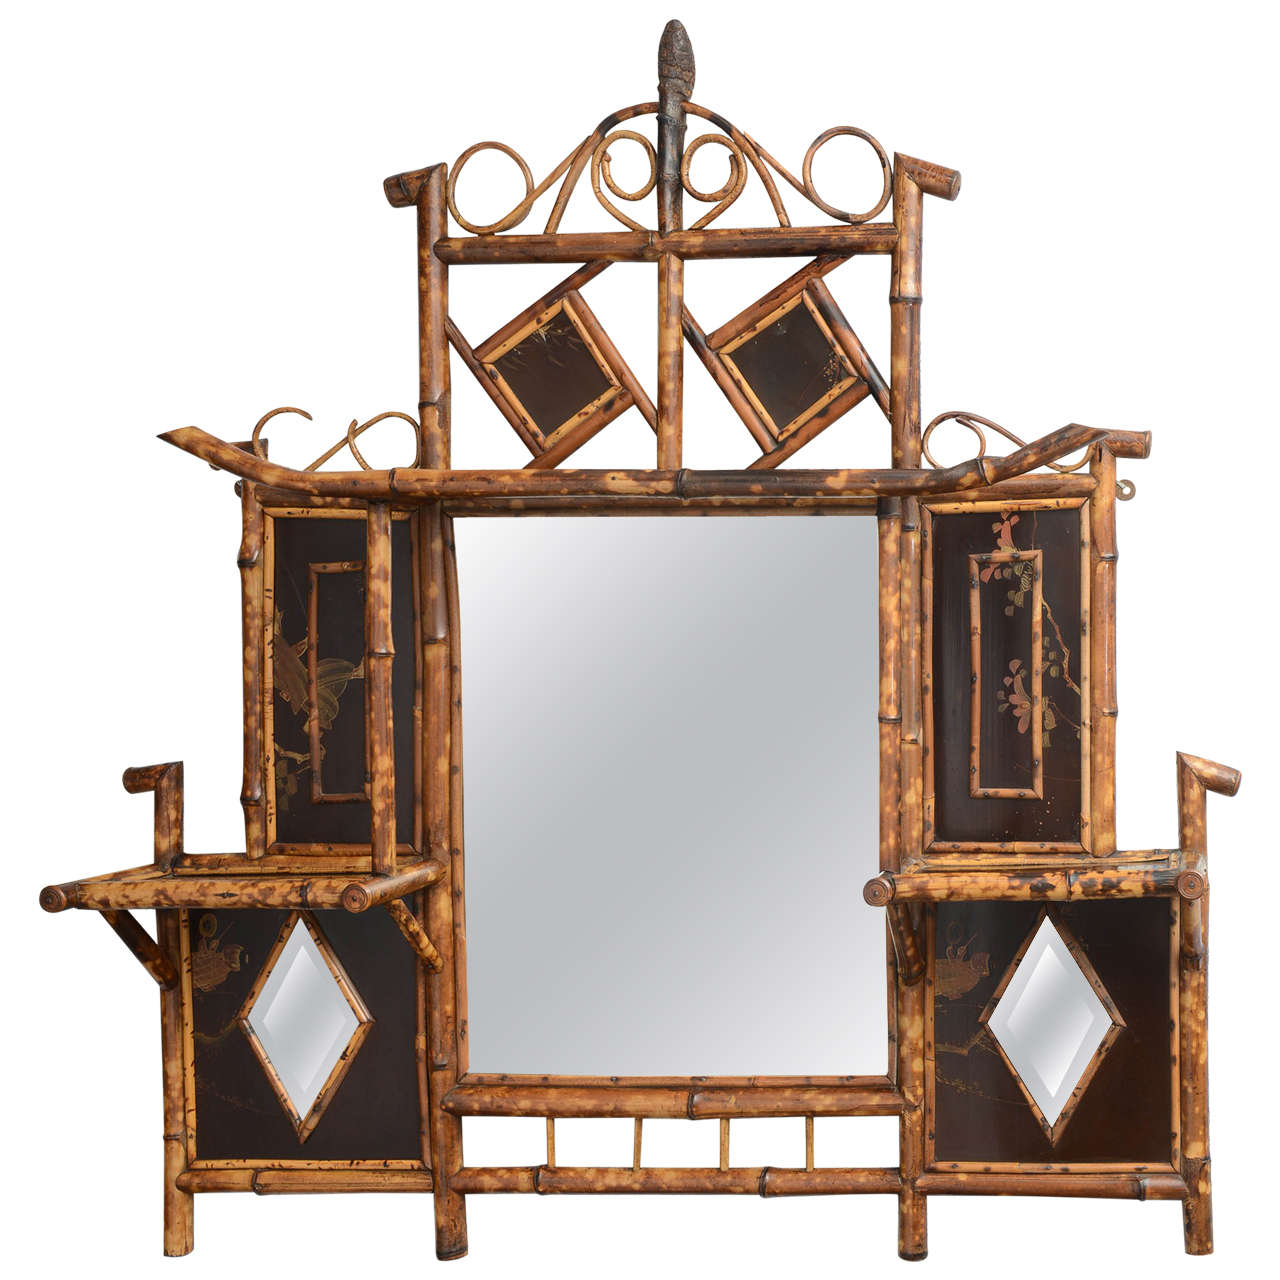 Beautiful 19th c. English Bamboo Mirror with Shelves